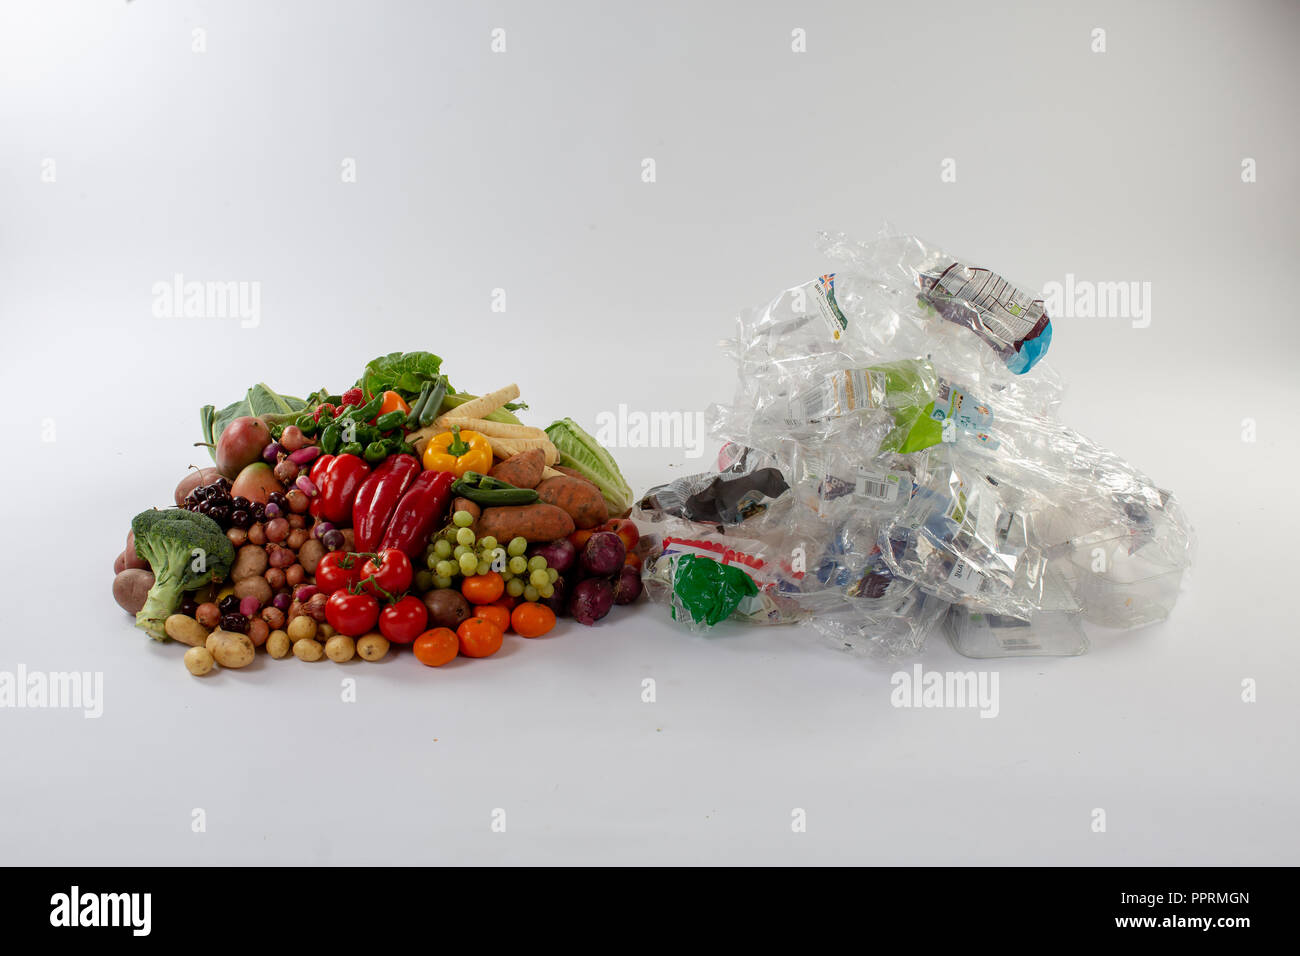 Plastic packaging on fruit and vegetables in the UK Stock Photo